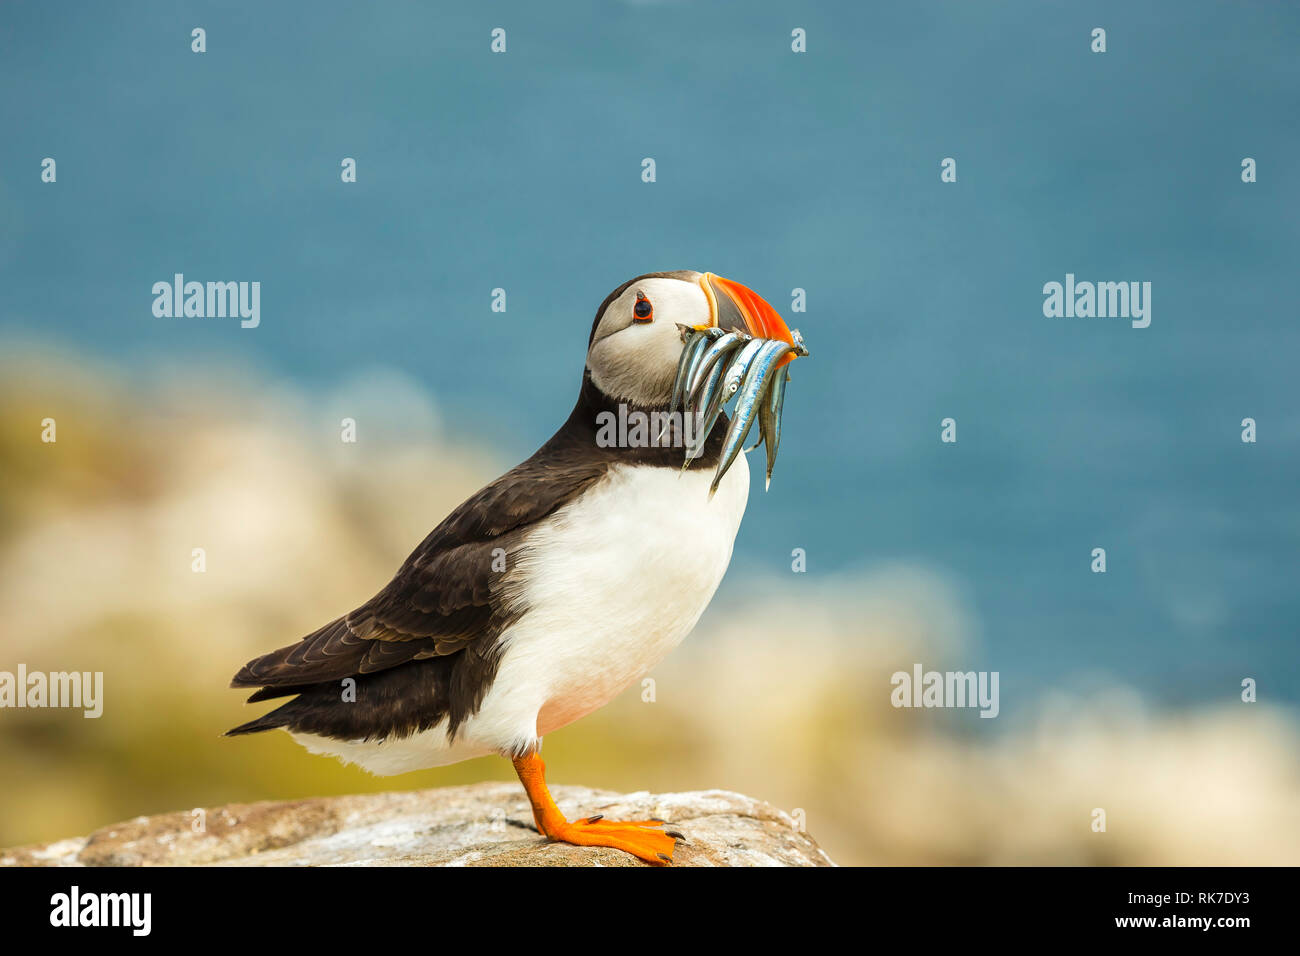 Puffin (Fratercula arctica) single, atlantic puffin with sand eels in its beak, facing right and perched on a rock. Blurred blue background. Landscape Stock Photo